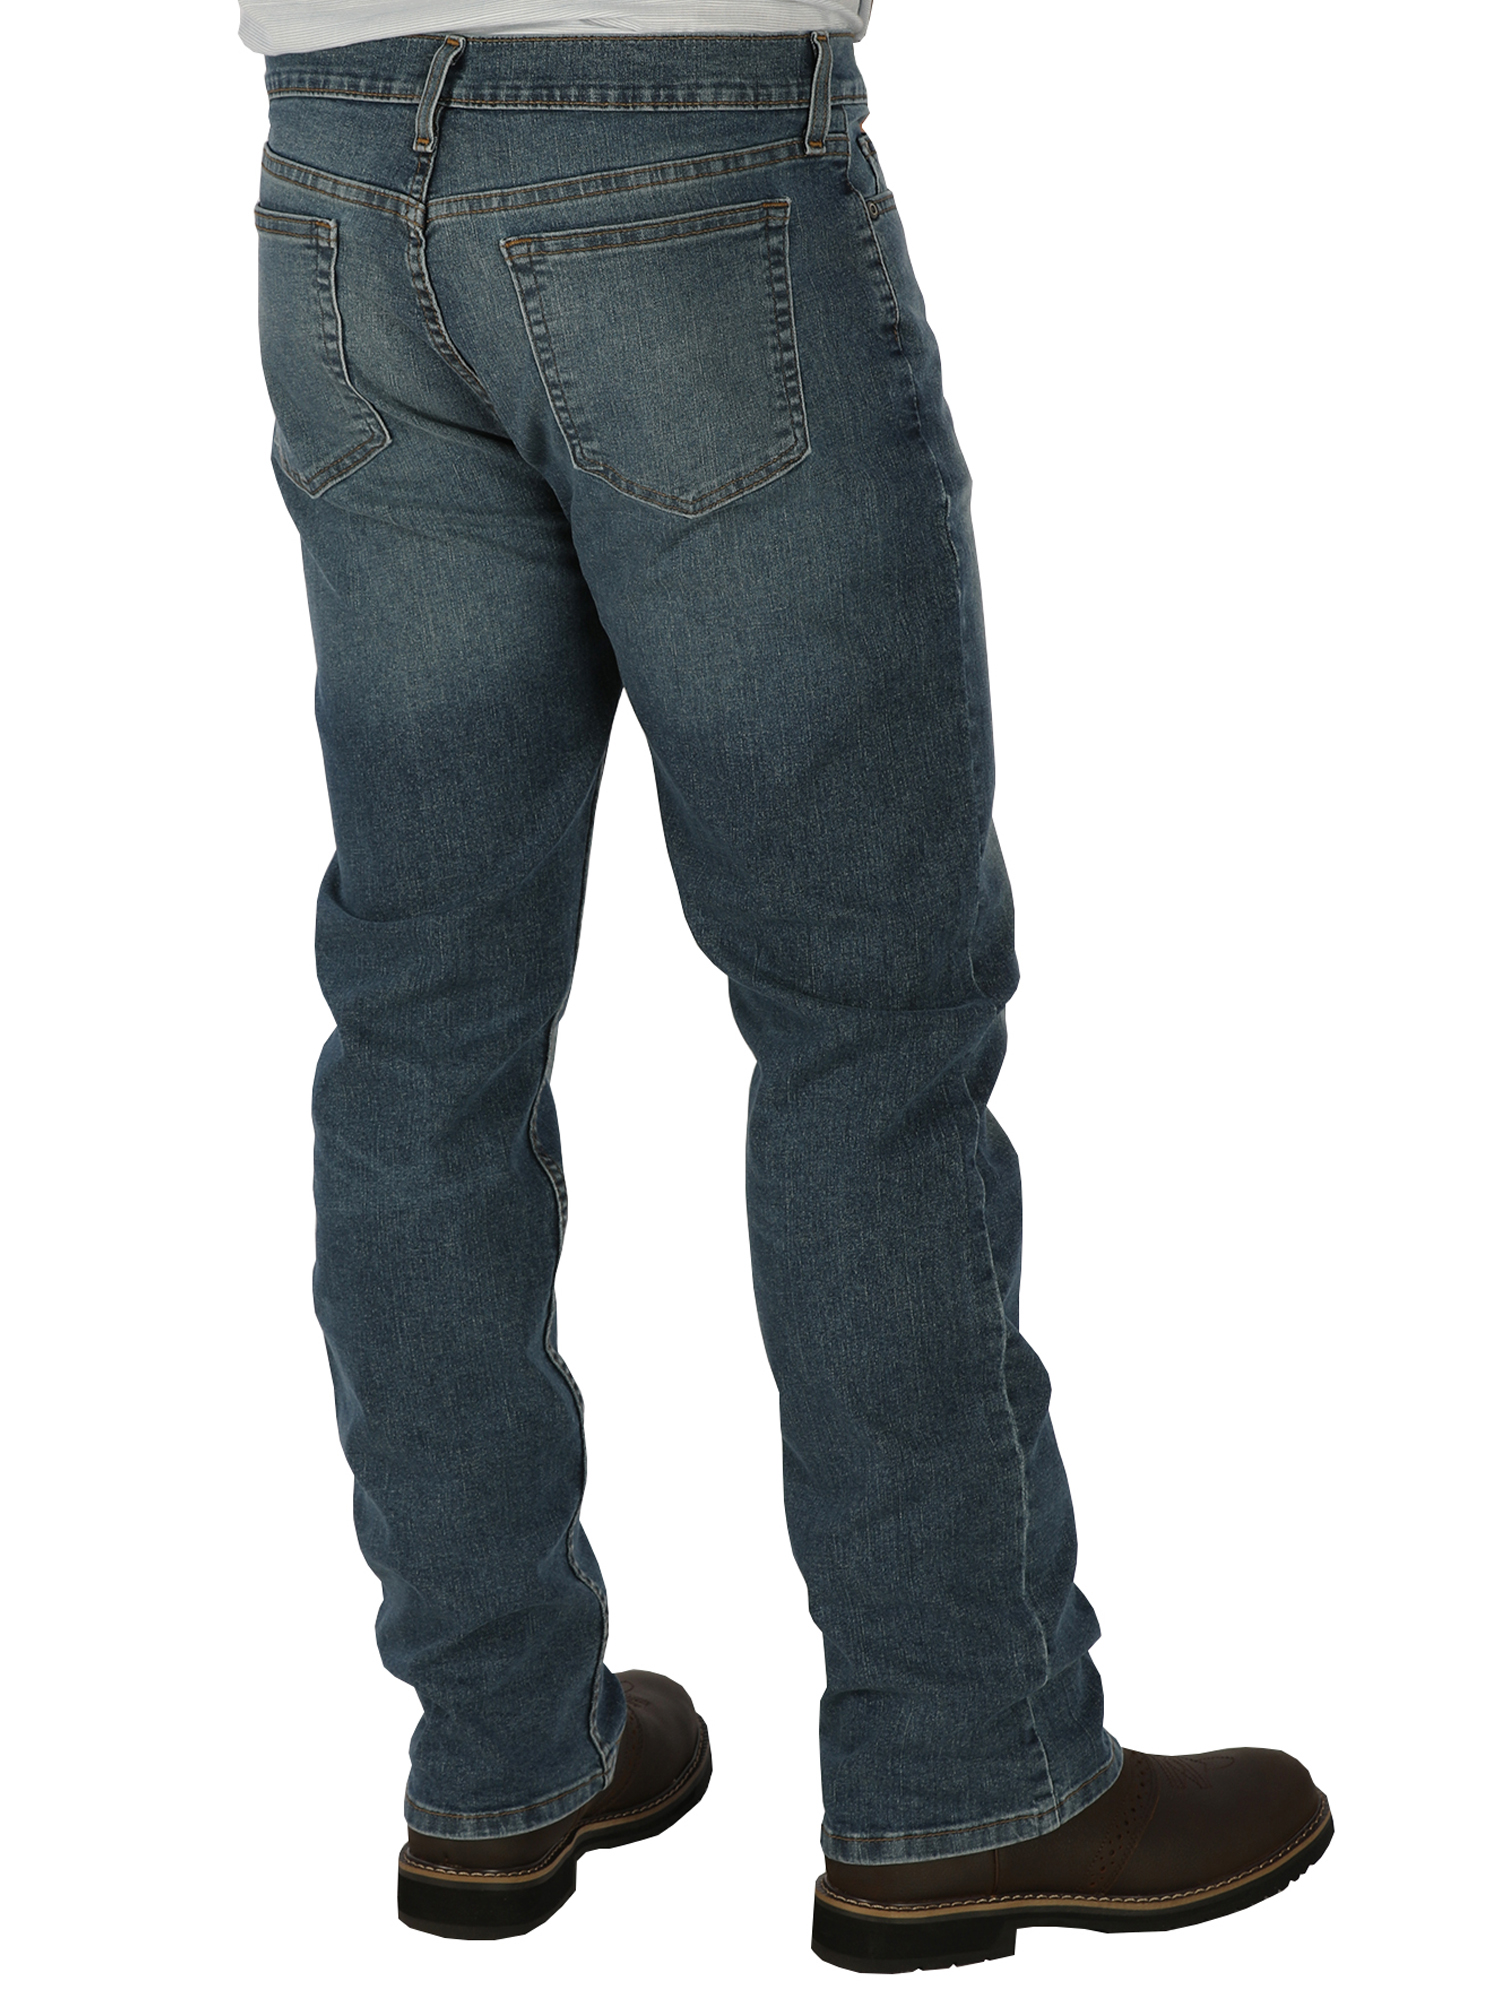 George Men's Bootcut Jeans - image 2 of 5